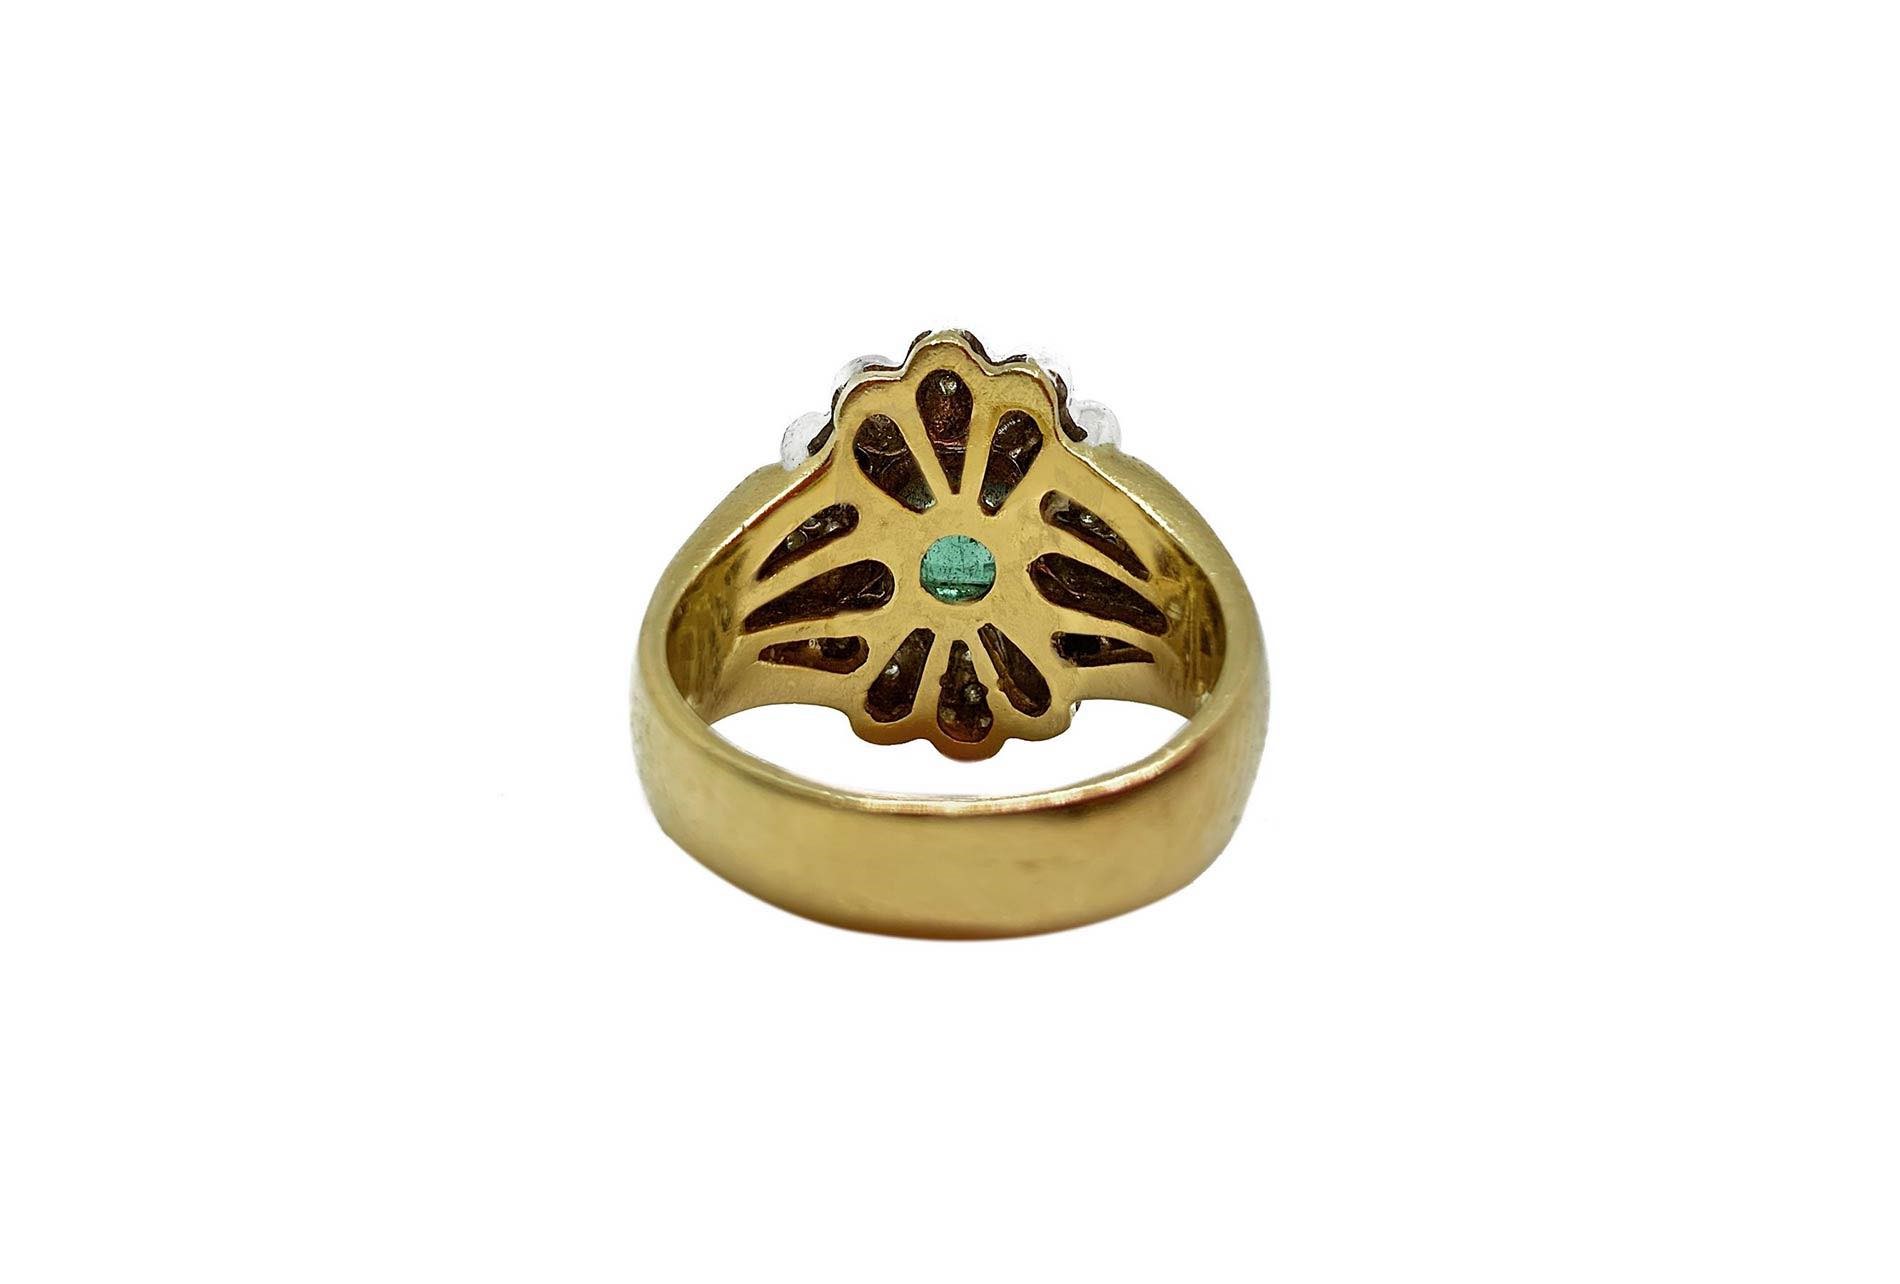 Ring in yellow gold, diamonds and emeralds - Image 6 of 6